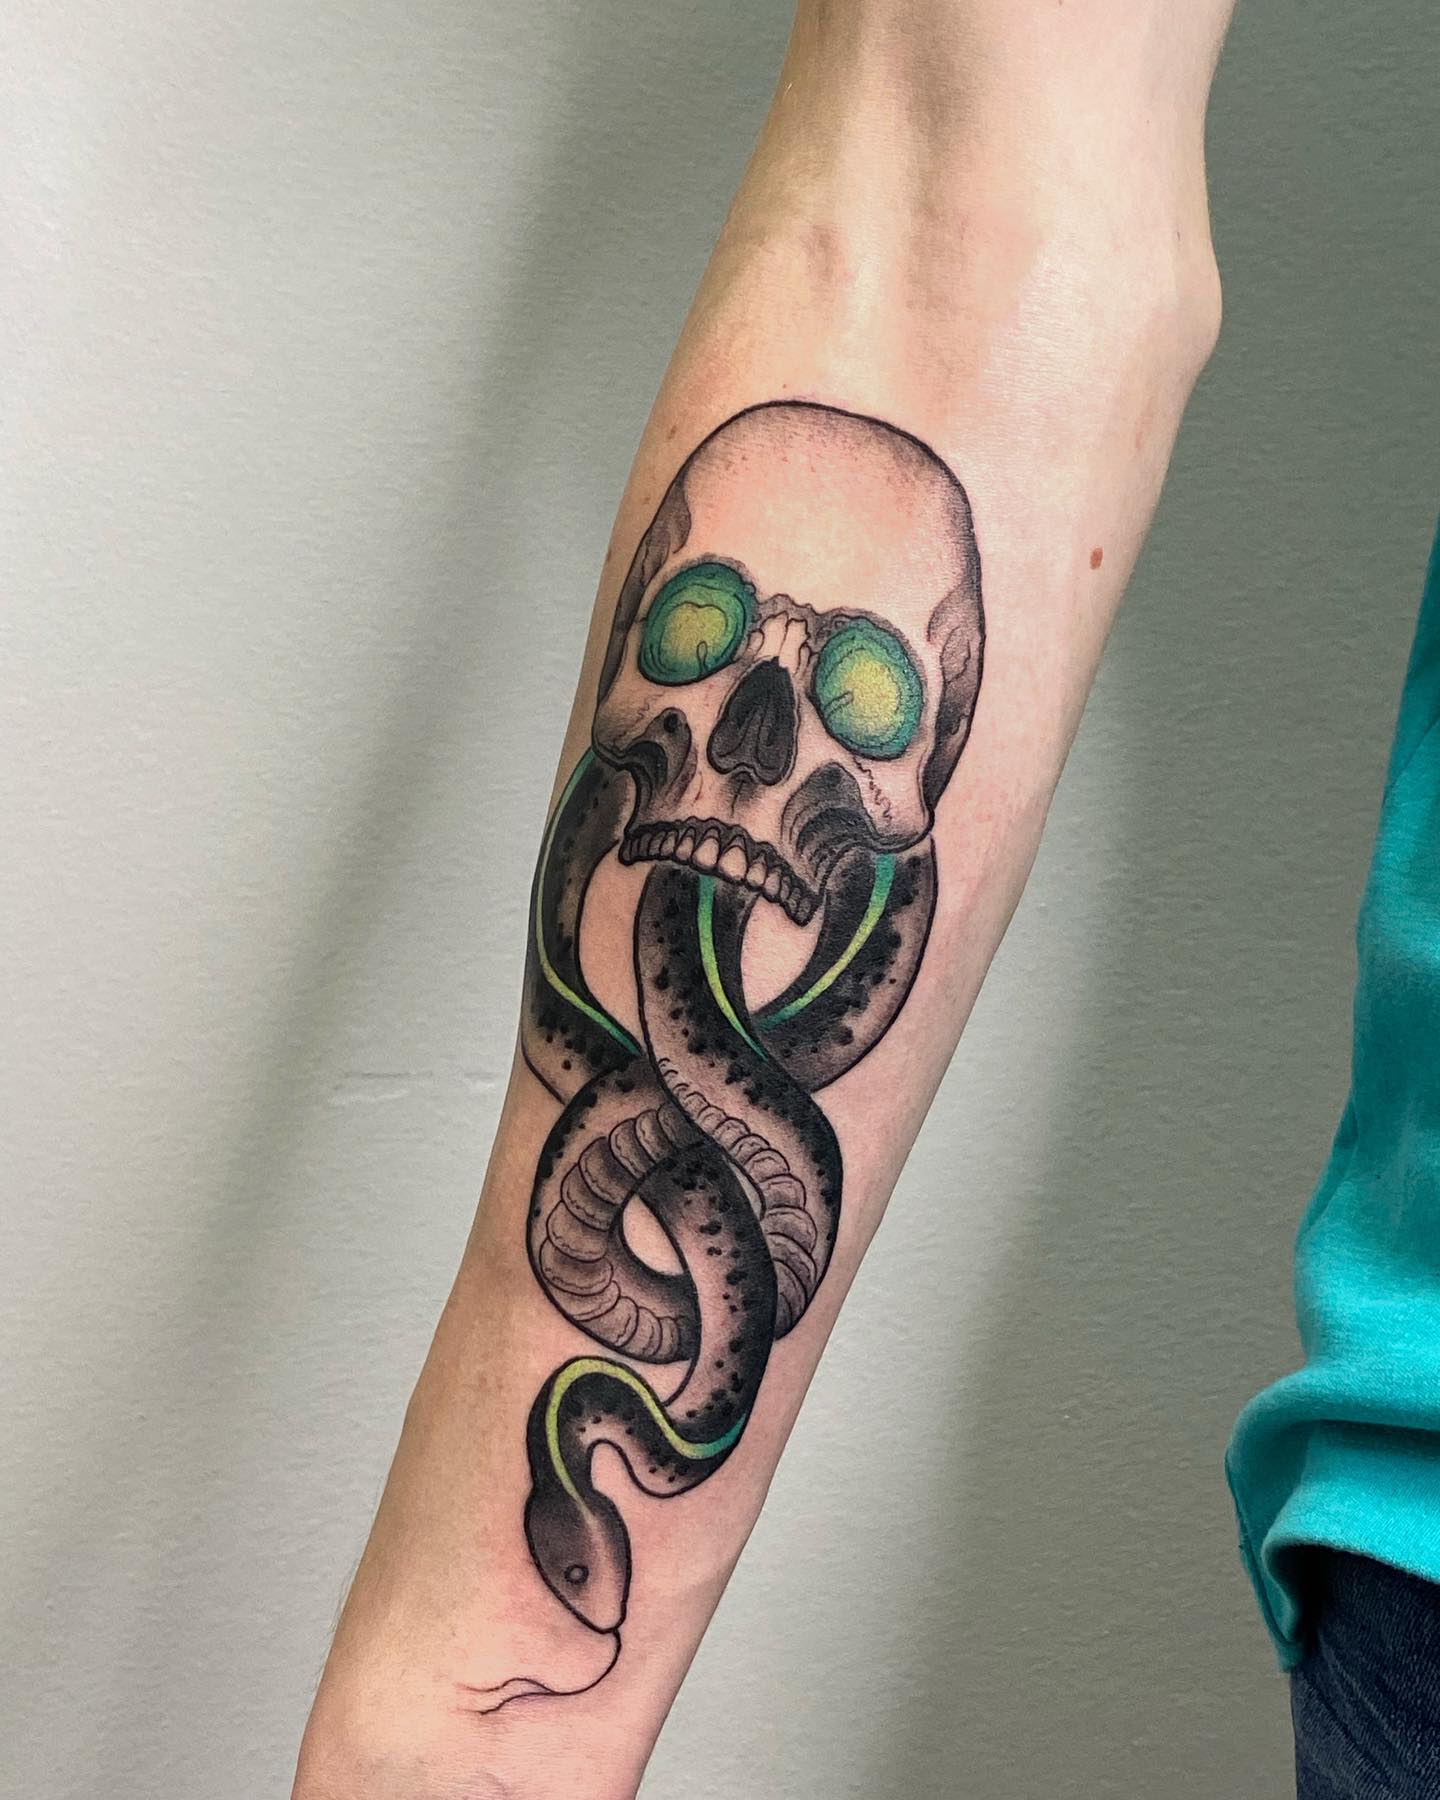 Being a tattoo that represents the death eaters' love for Voldemort, and their willingness to die for him, this one rocks. The green line which comes down from the skull's eyeballs to the snake's body adds a great detail to the whole picture.